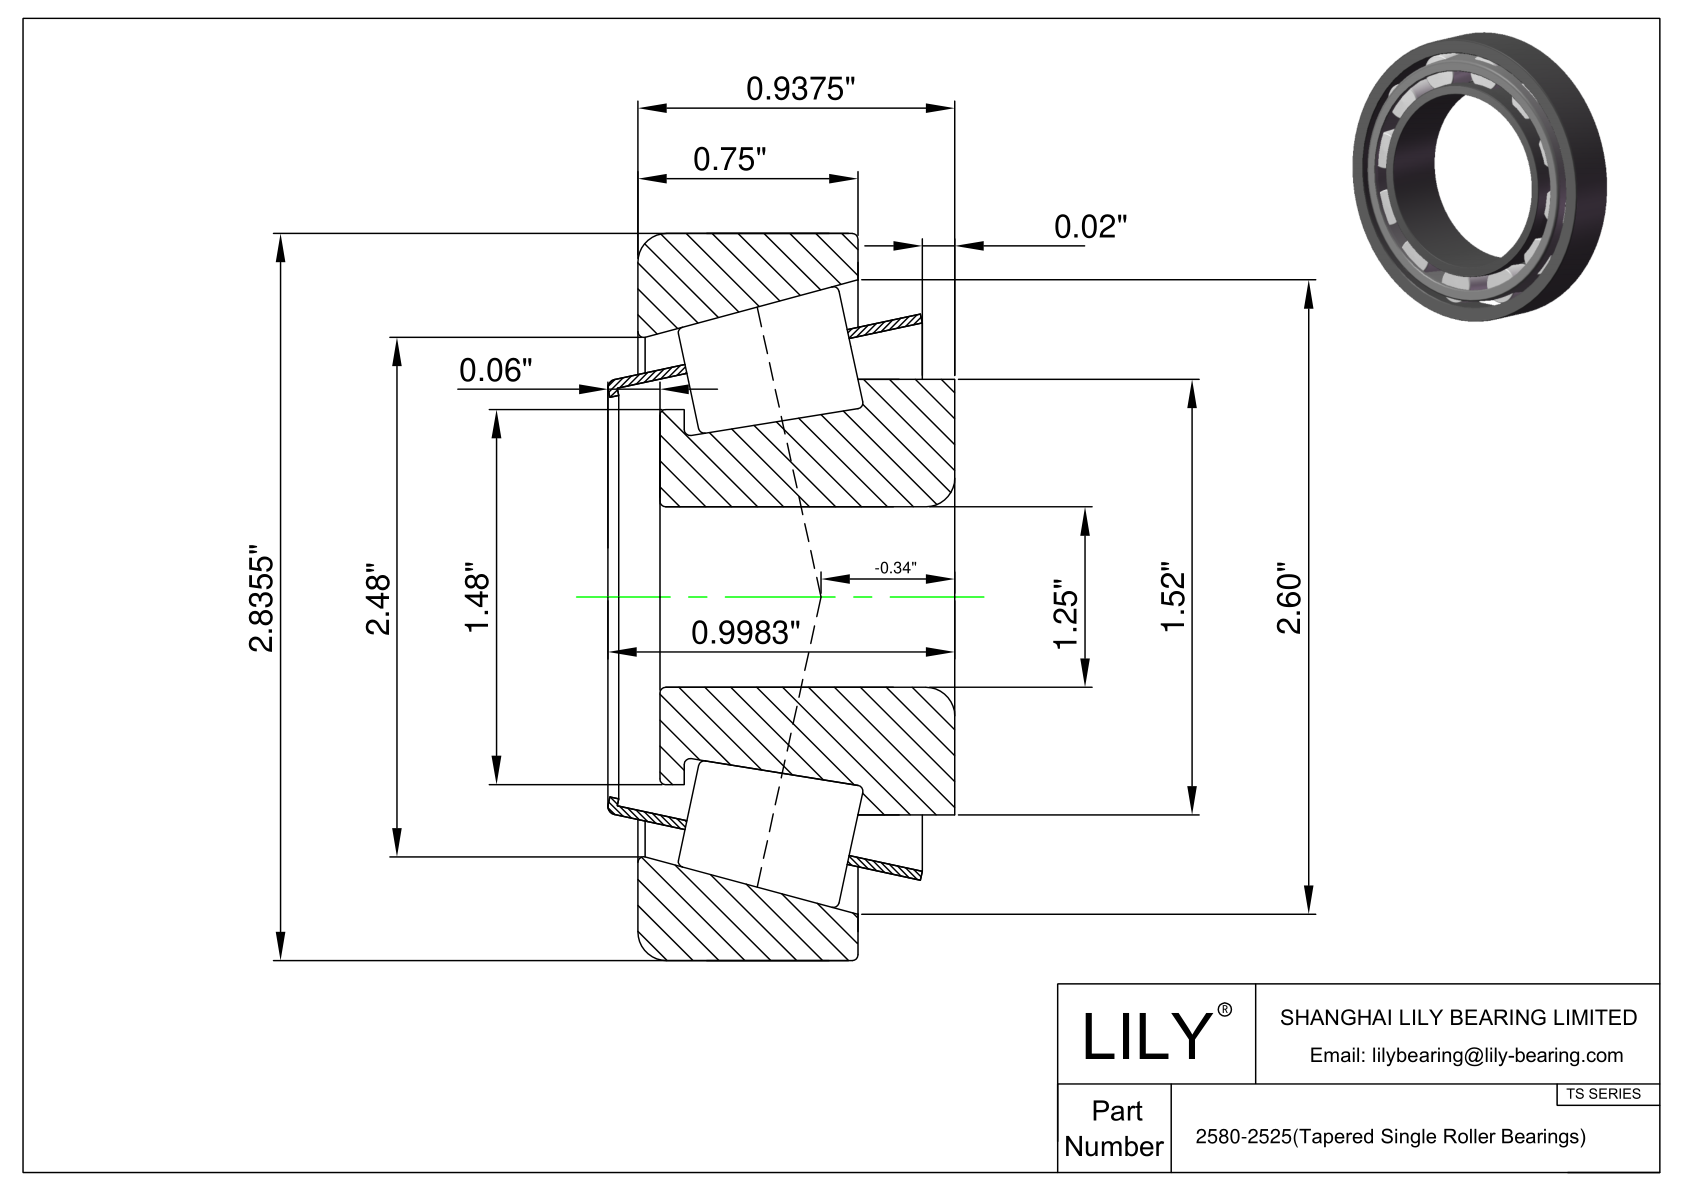 2580-2525 TS (Tapered Single Roller Bearings) (Imperial) cad drawing